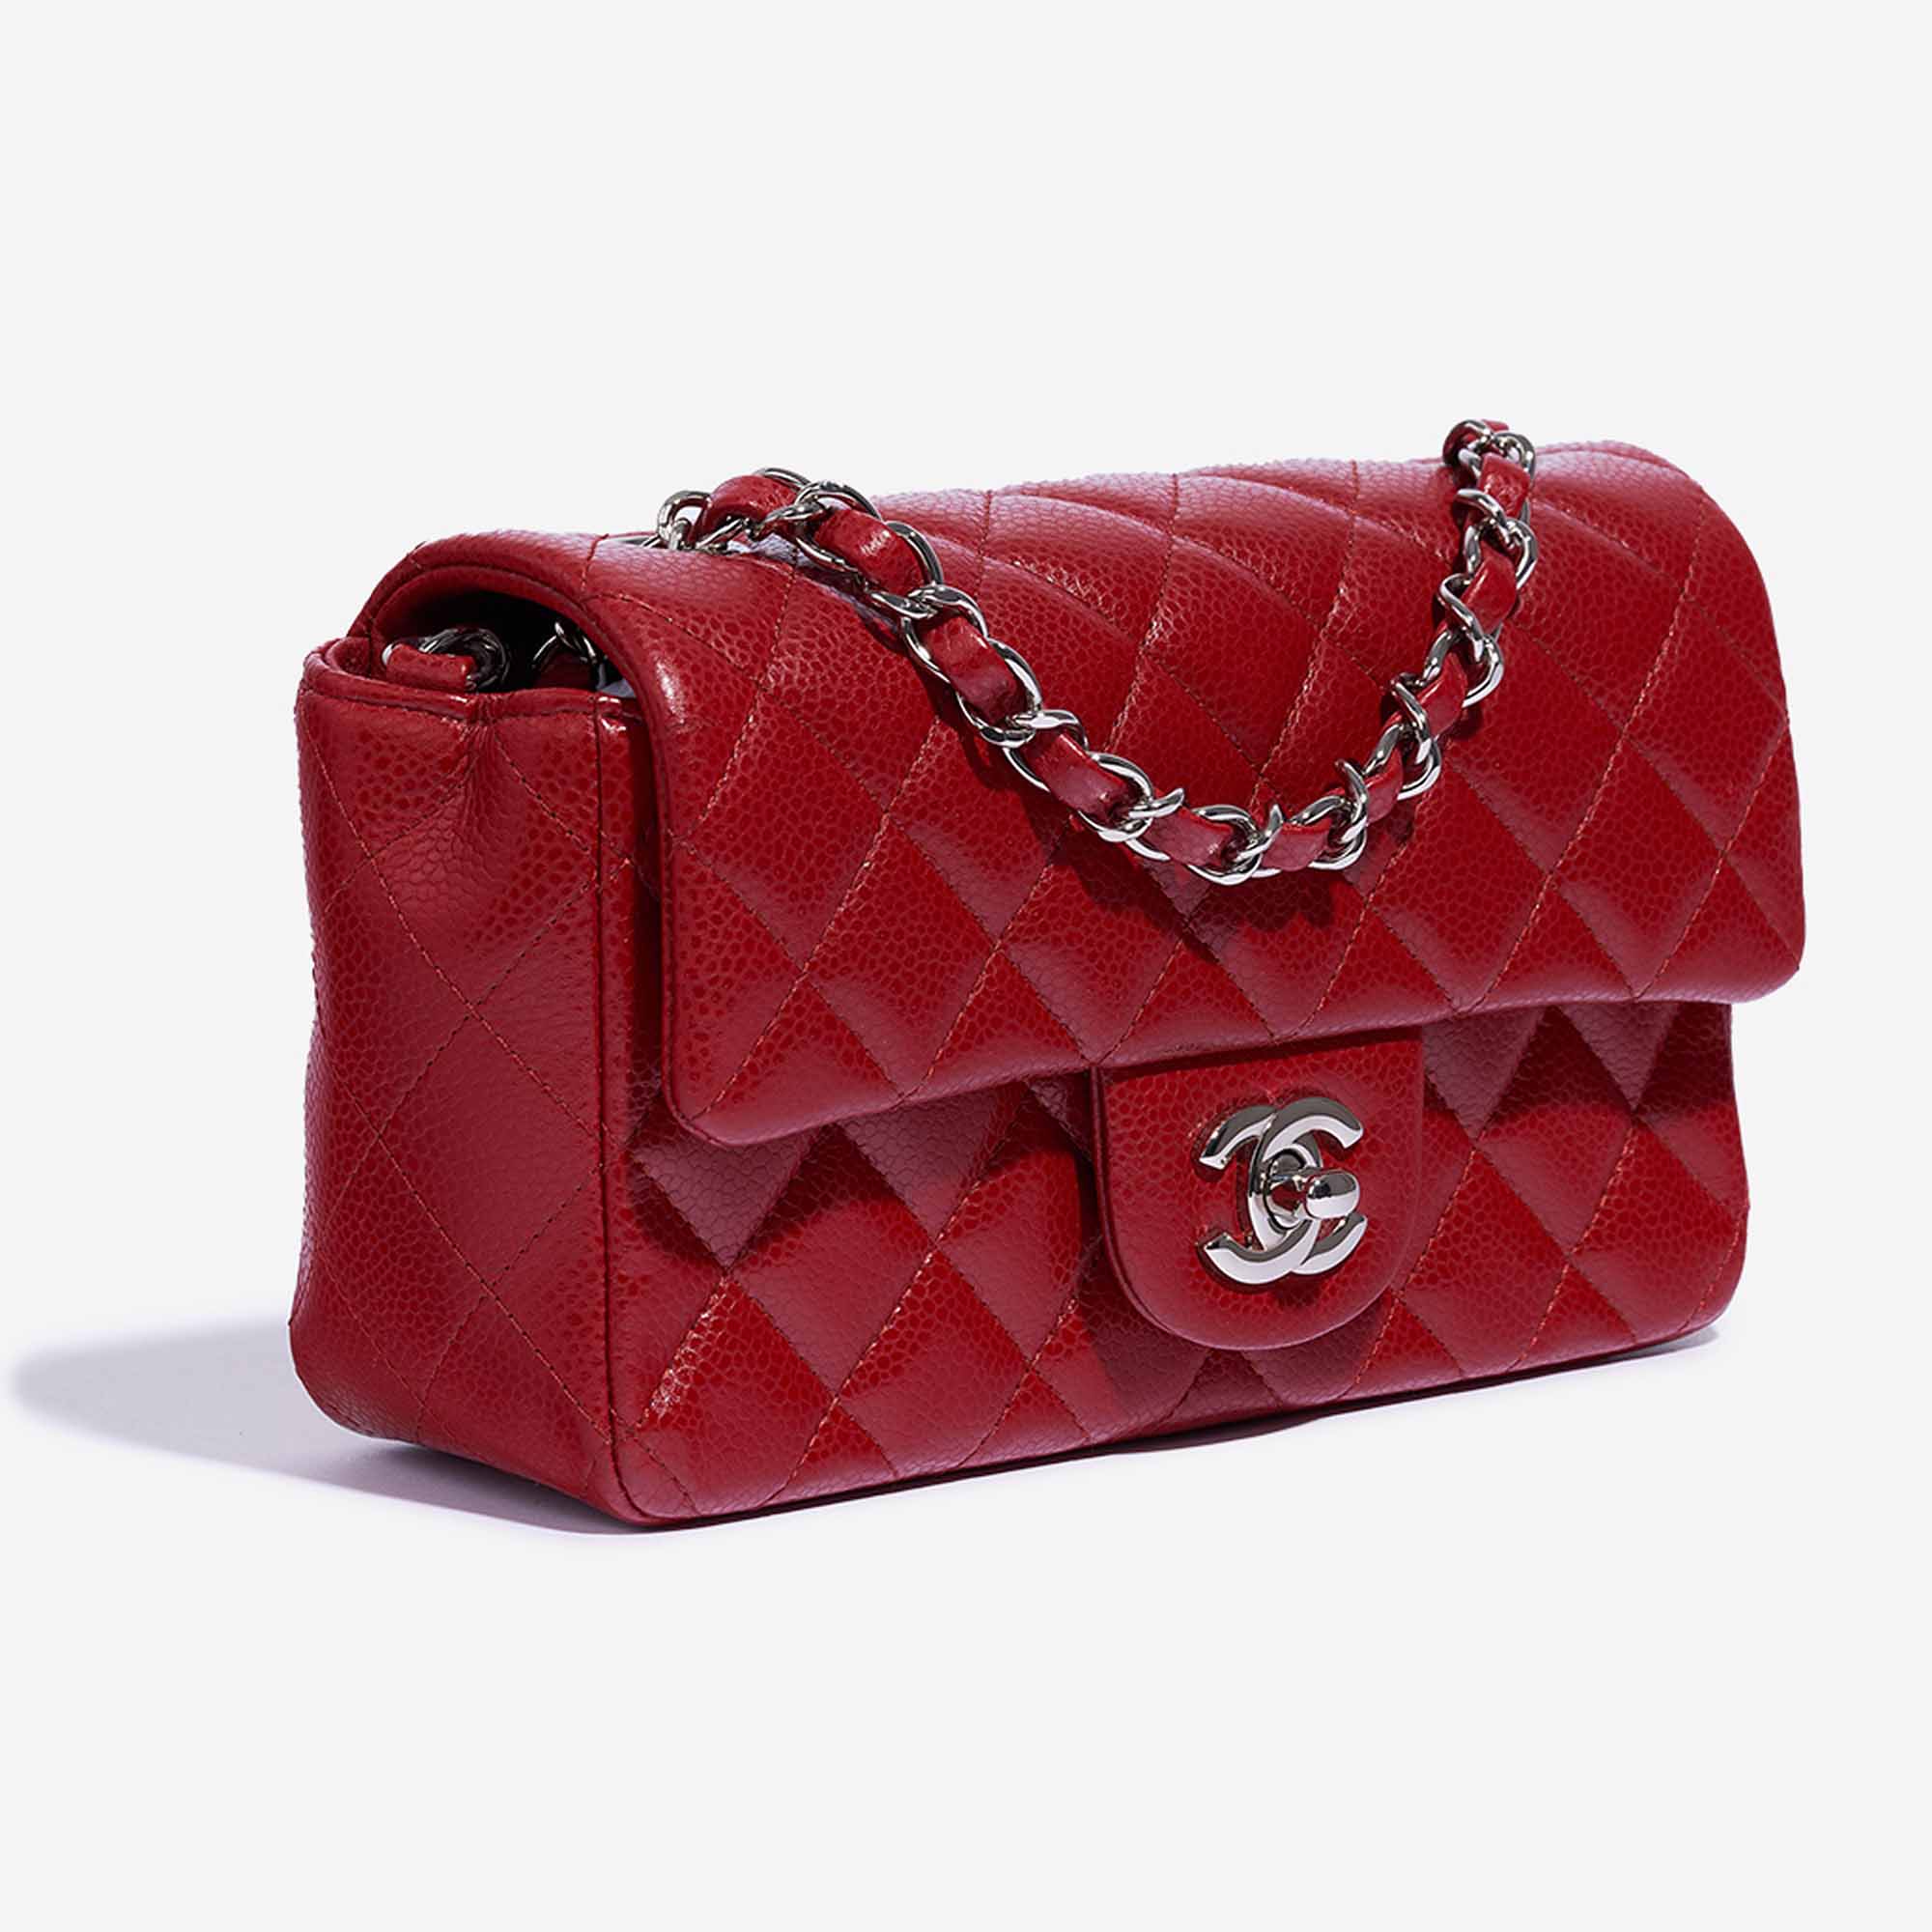 CHANEL CHANEL Matelasse W Flap Chain Shoulder Bag SHW Caviar leather Red  Used Women ｜Product Code：2101217011181｜BRAND OFF Online Store